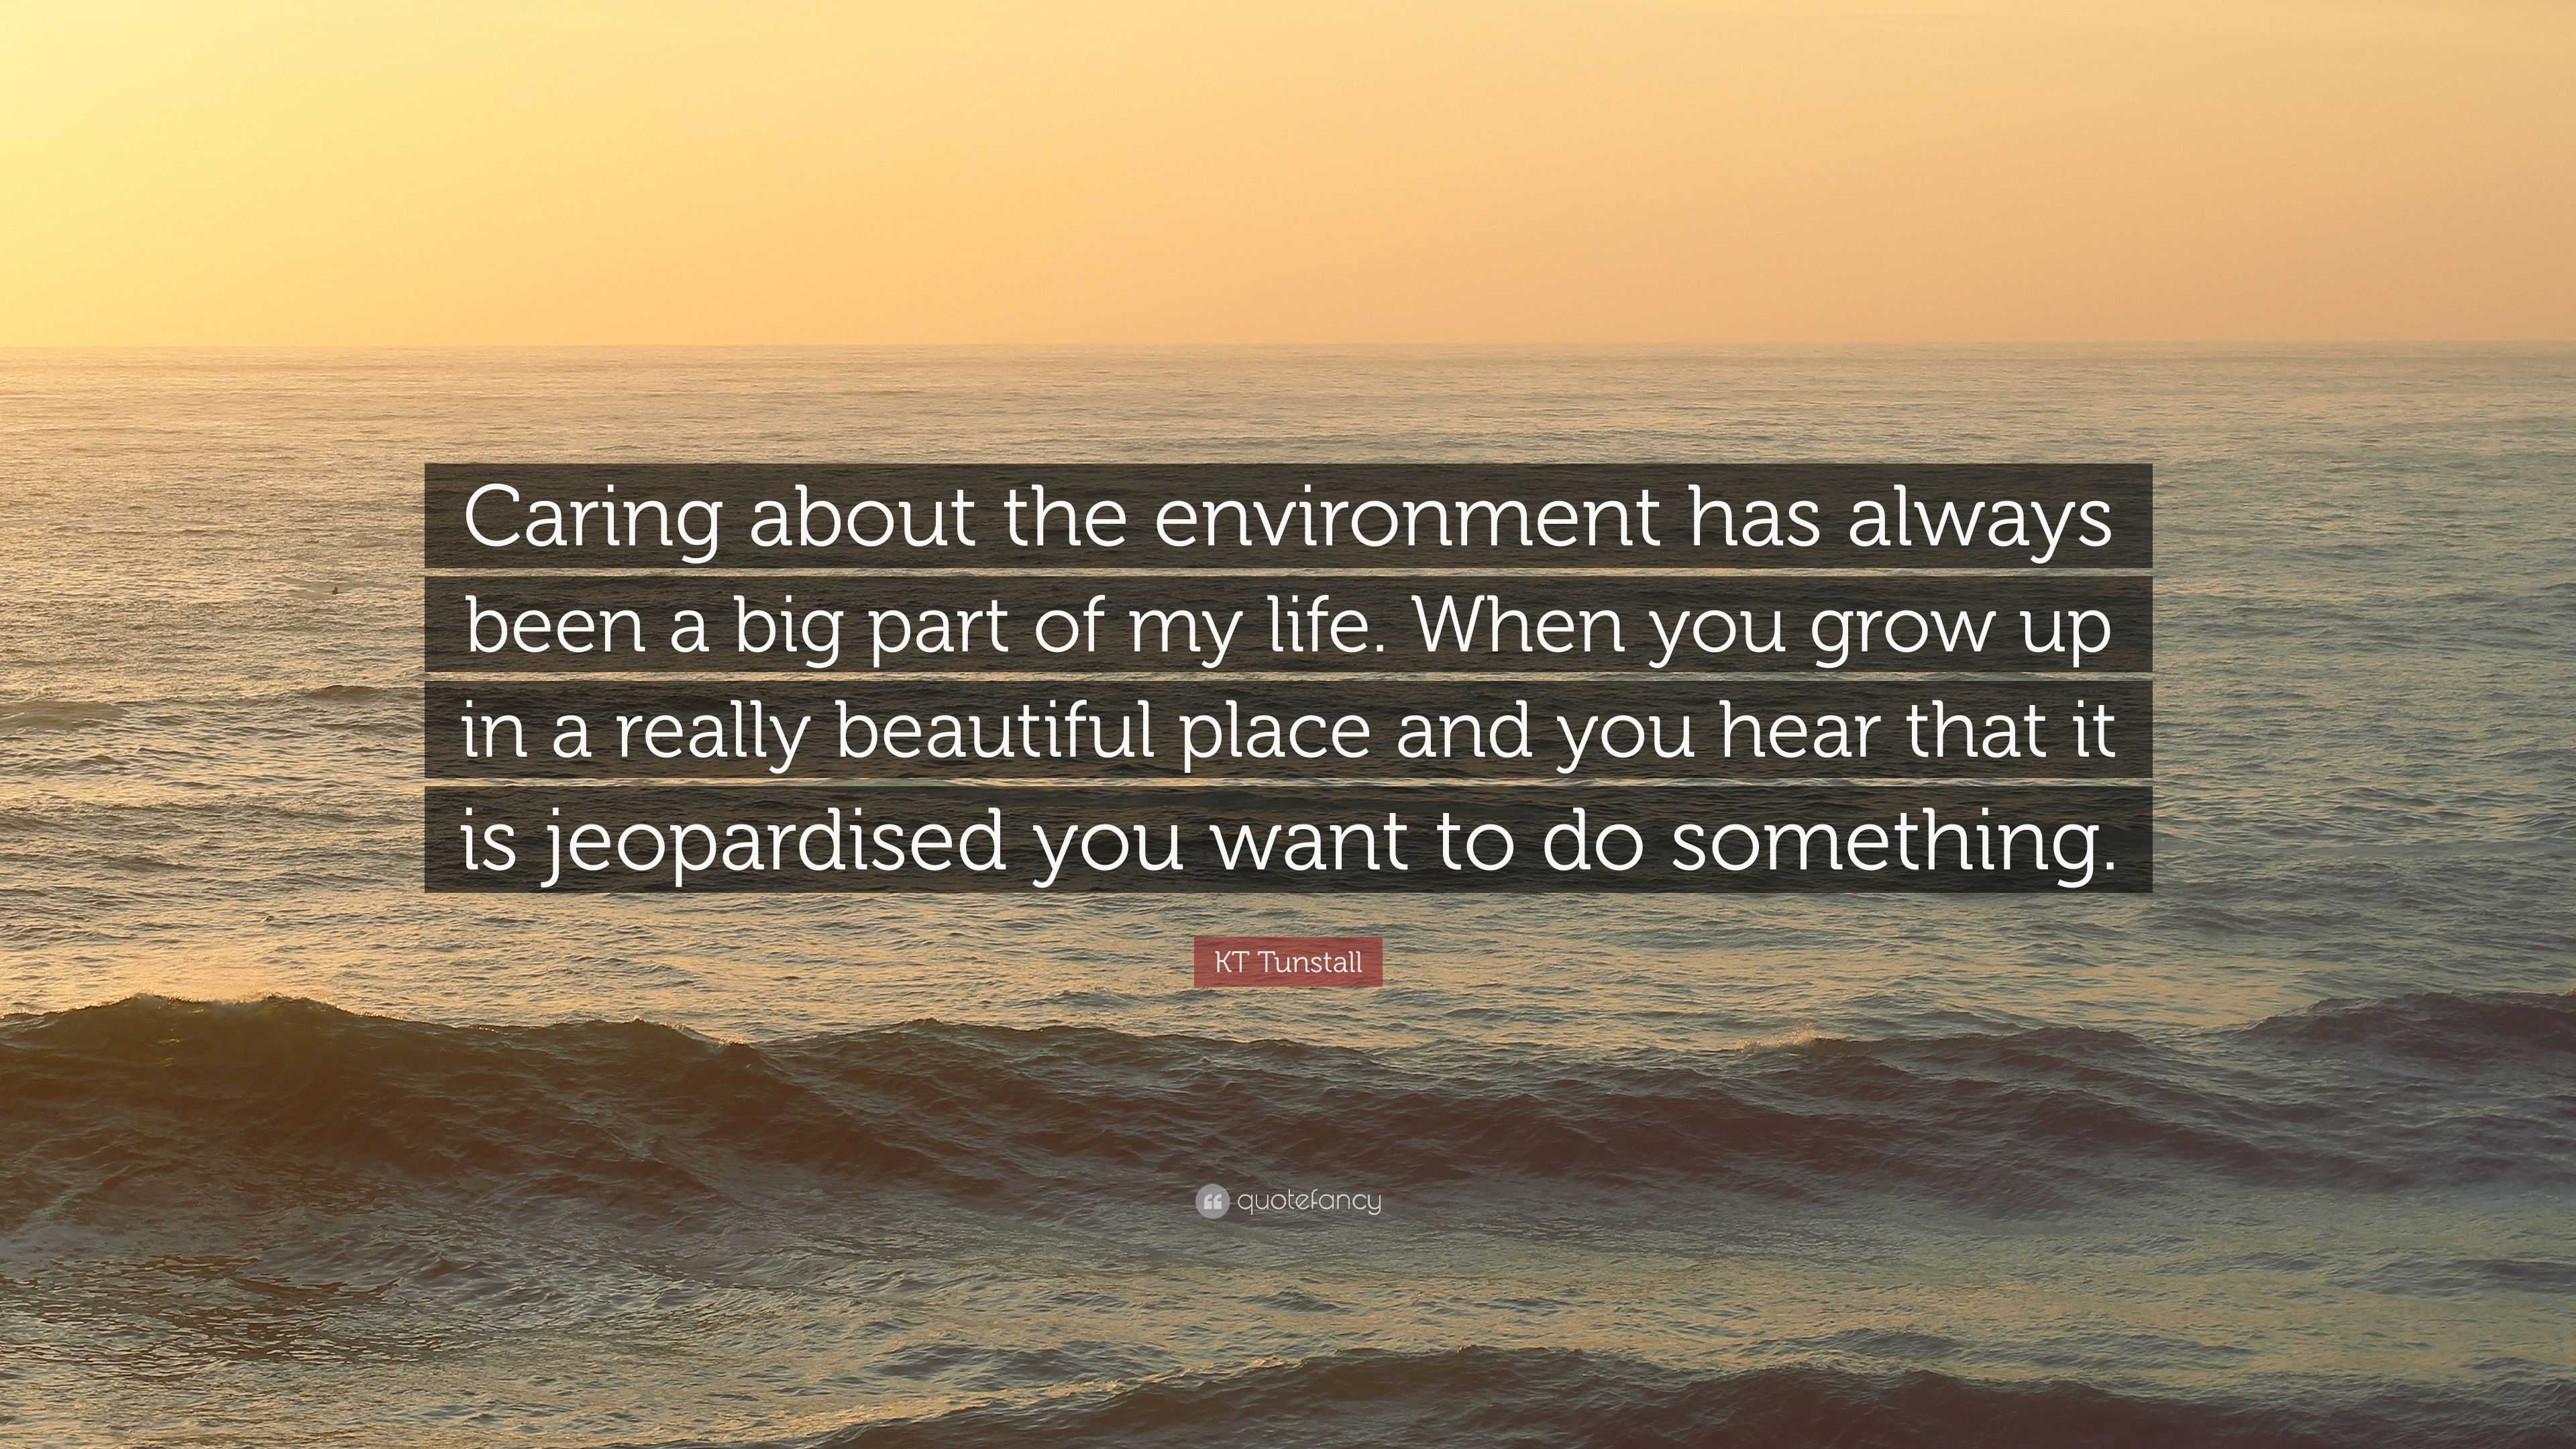 KT Tunstall Quote: “Caring about the environment has always been a big